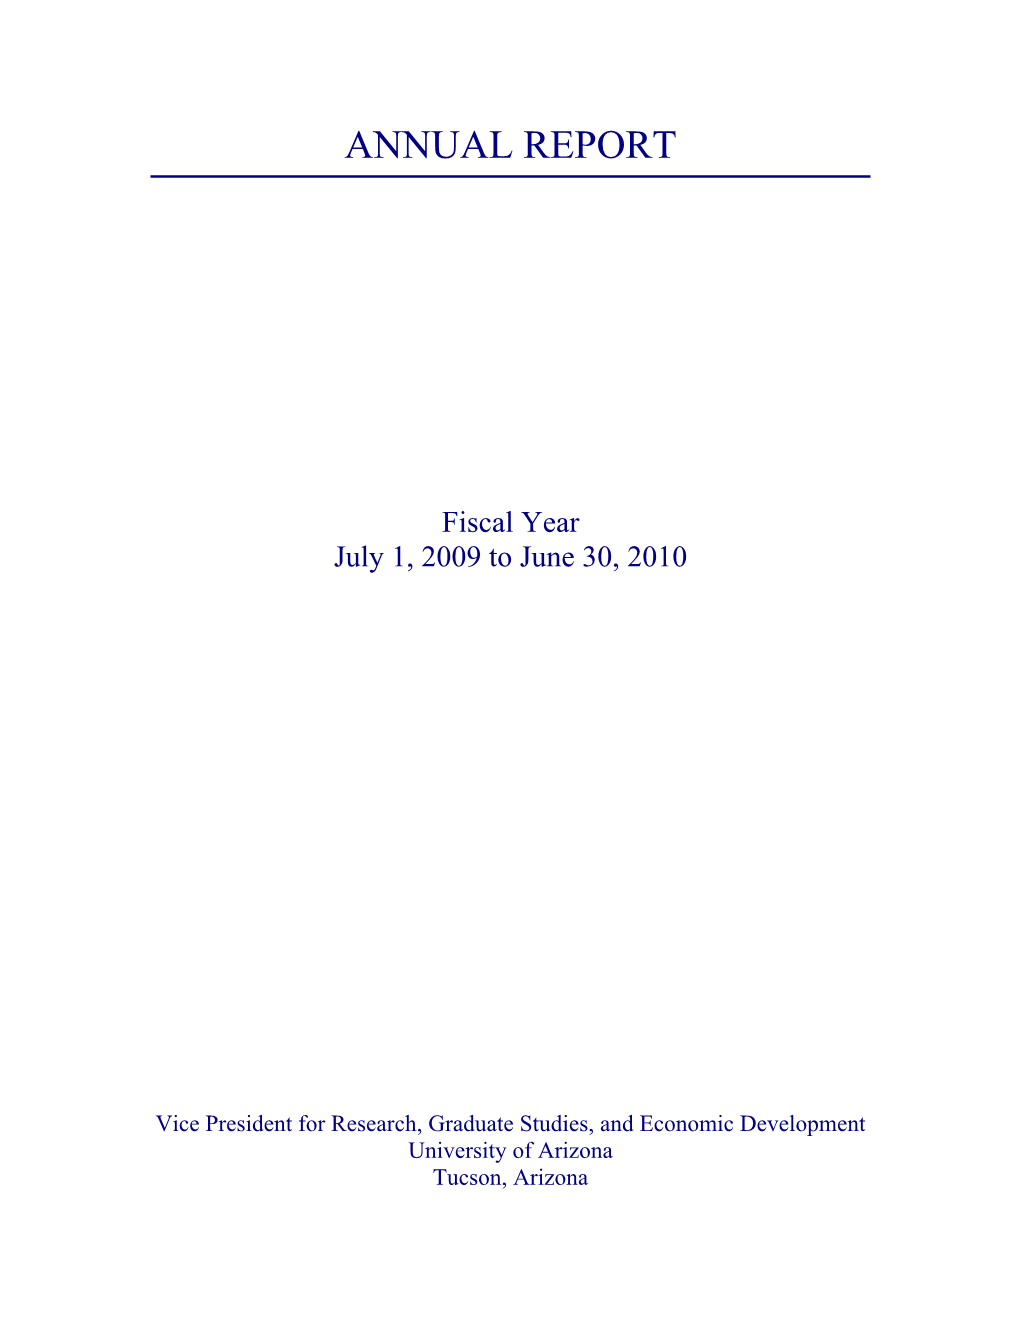 2010 Annual Report of Awards